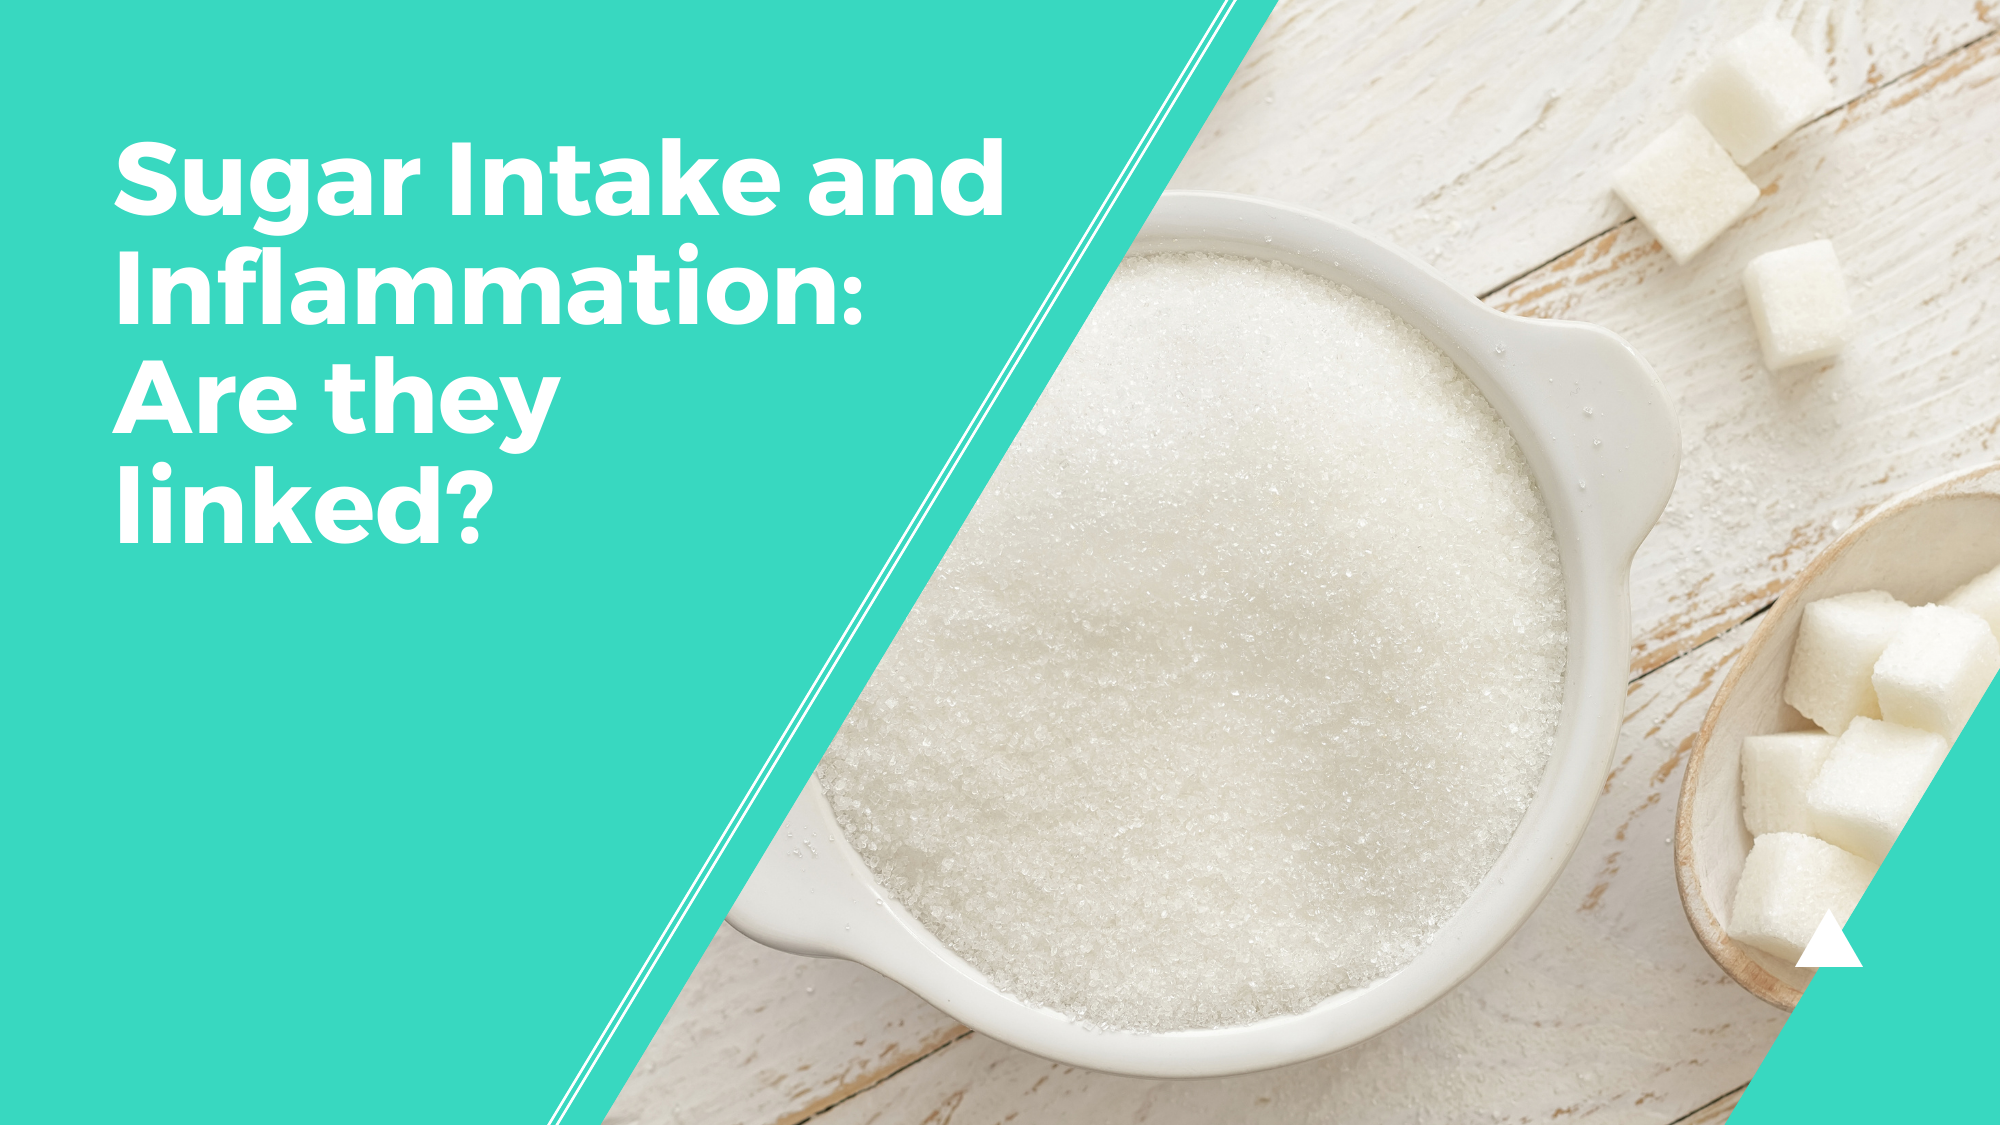 Sugar Intake and Inflammation: Are they linked?